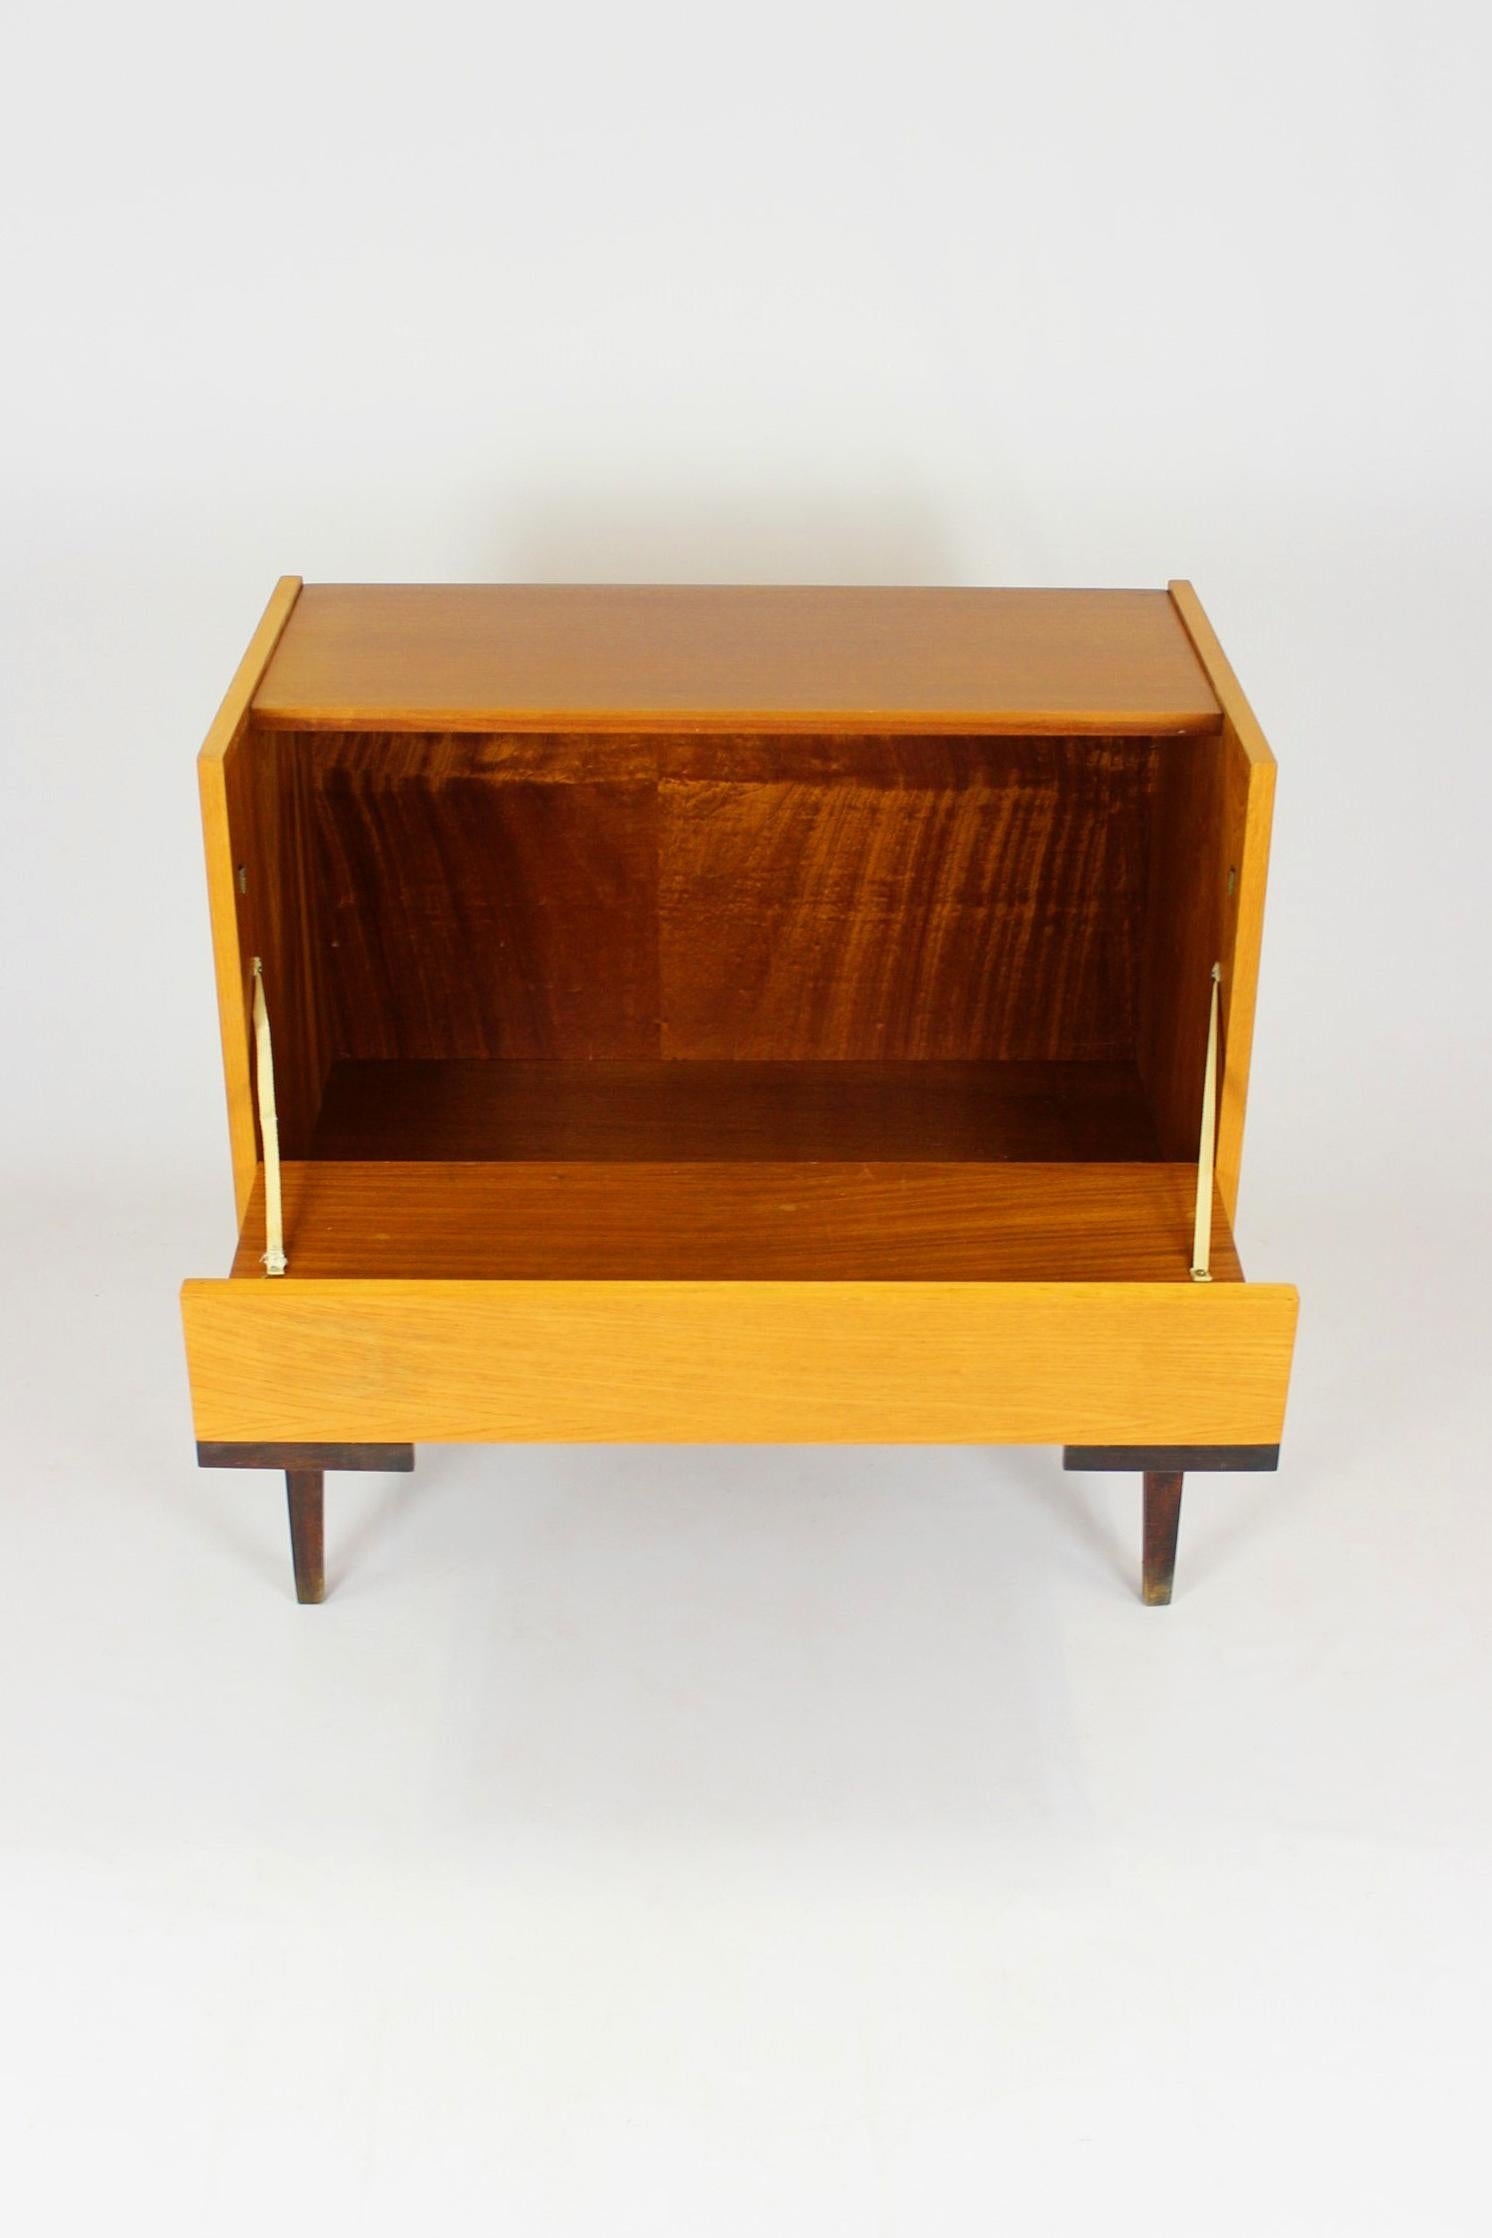 This ash & mahogany small sideboard was manufactured in 1970 by UP Zavody in Czechoslovakia. It is preserved in its original, very good condition.
We have more furniture from this set (wardrobe, 2 sideboards, bookcase, desk), more information